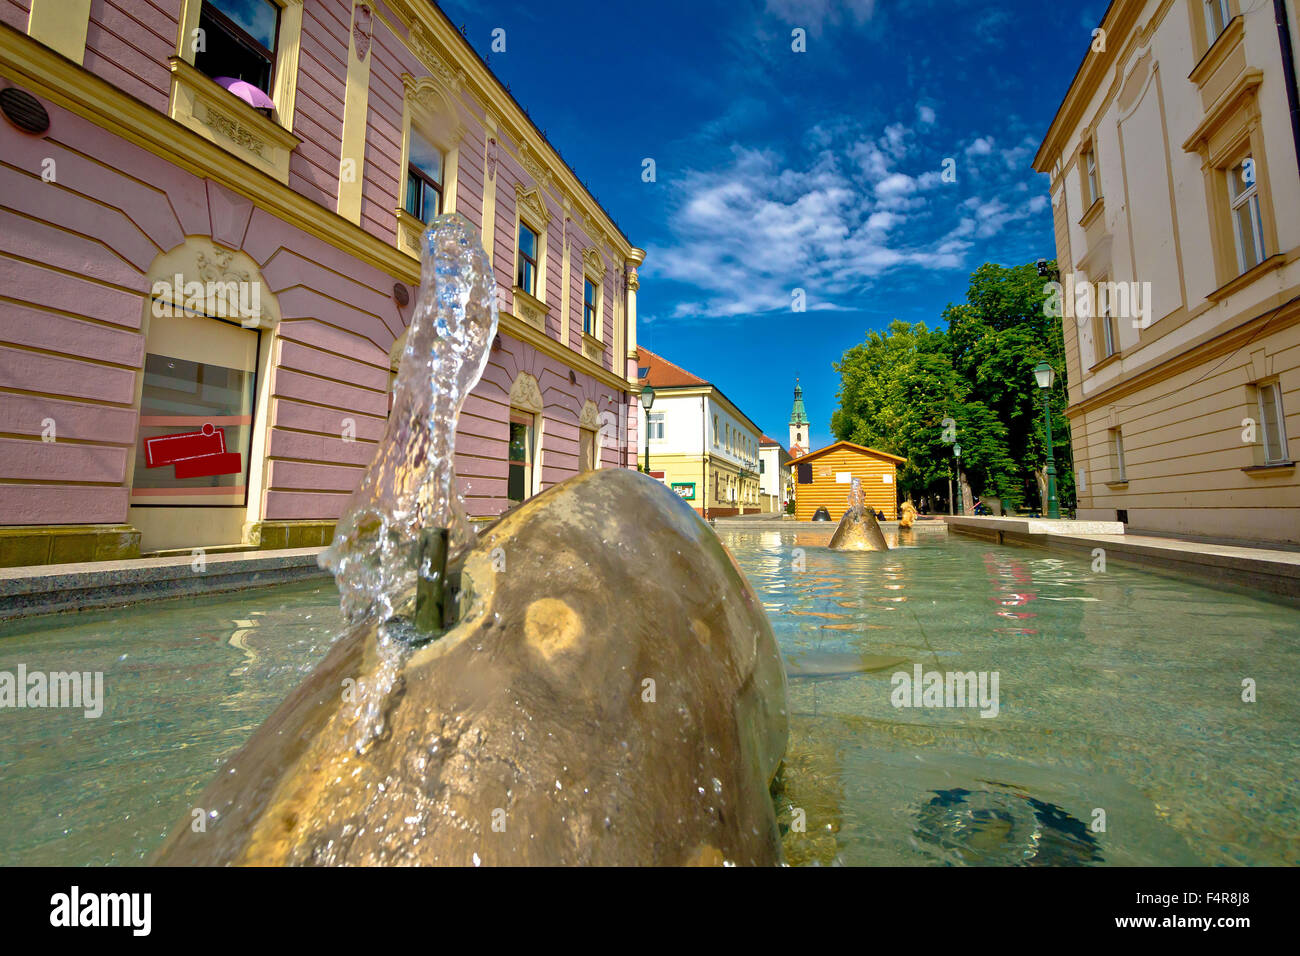 Town of Bjelovar fountain and square view, Croatia Stock Photo